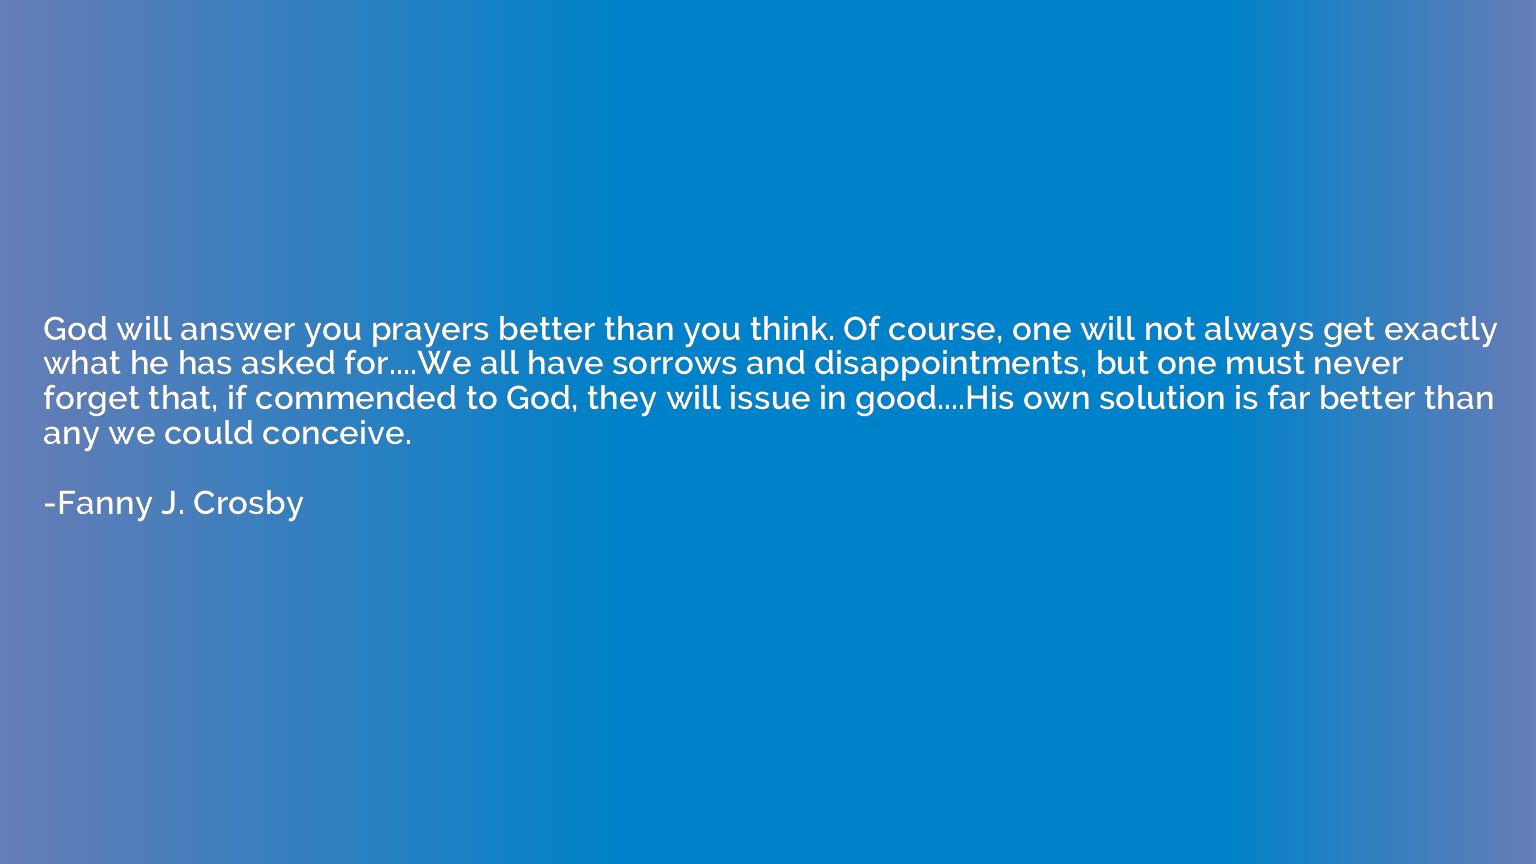 God will answer you prayers better than you think. Of course